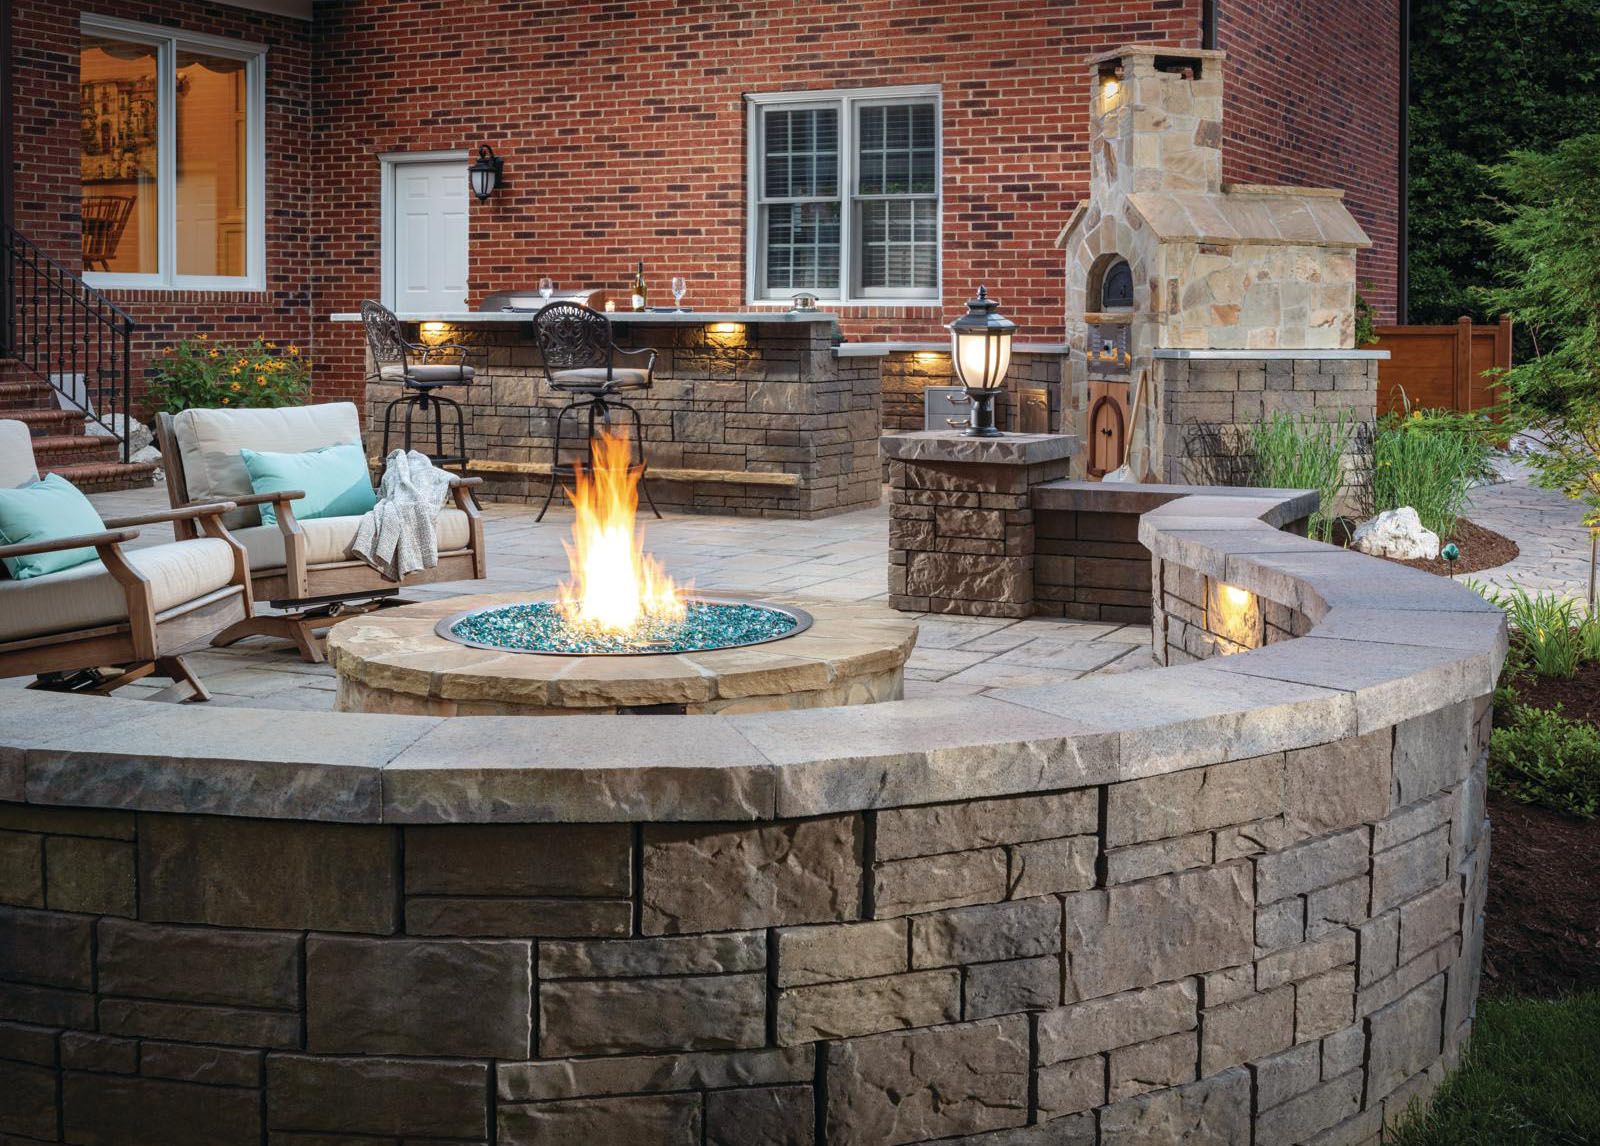 Built-in fire pit made of stones